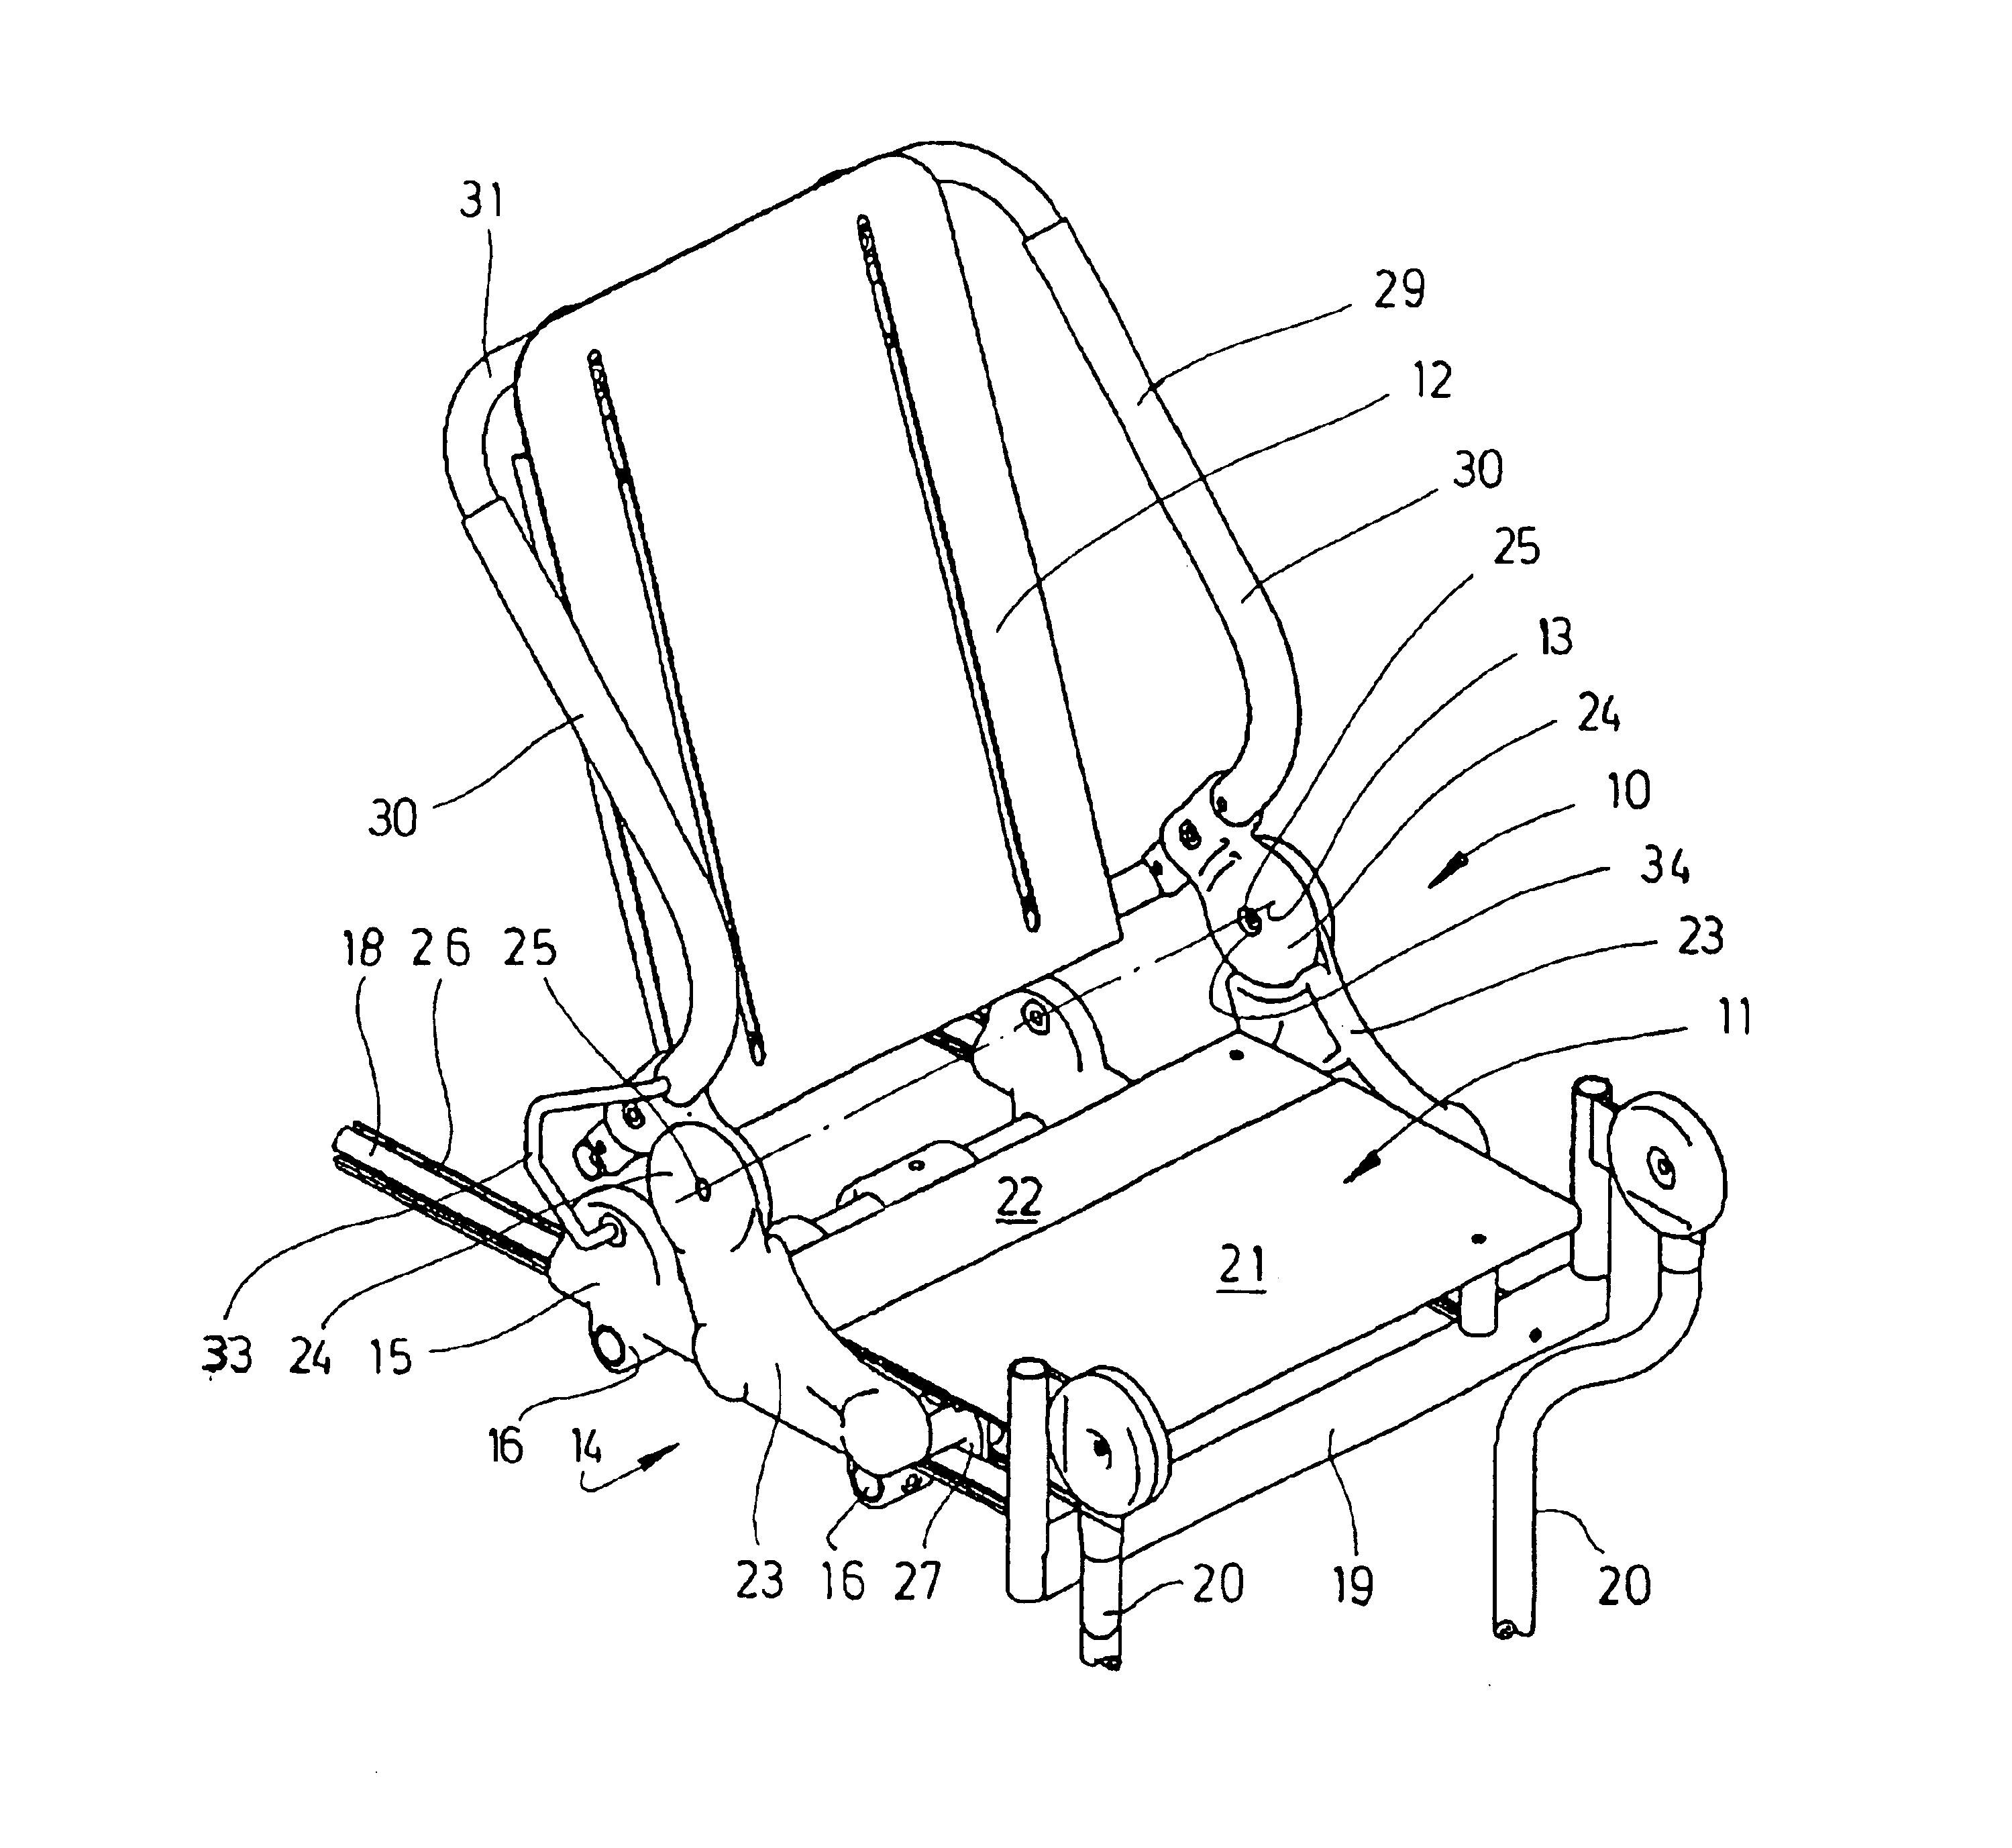 Seat for a wheeled carriage or chair